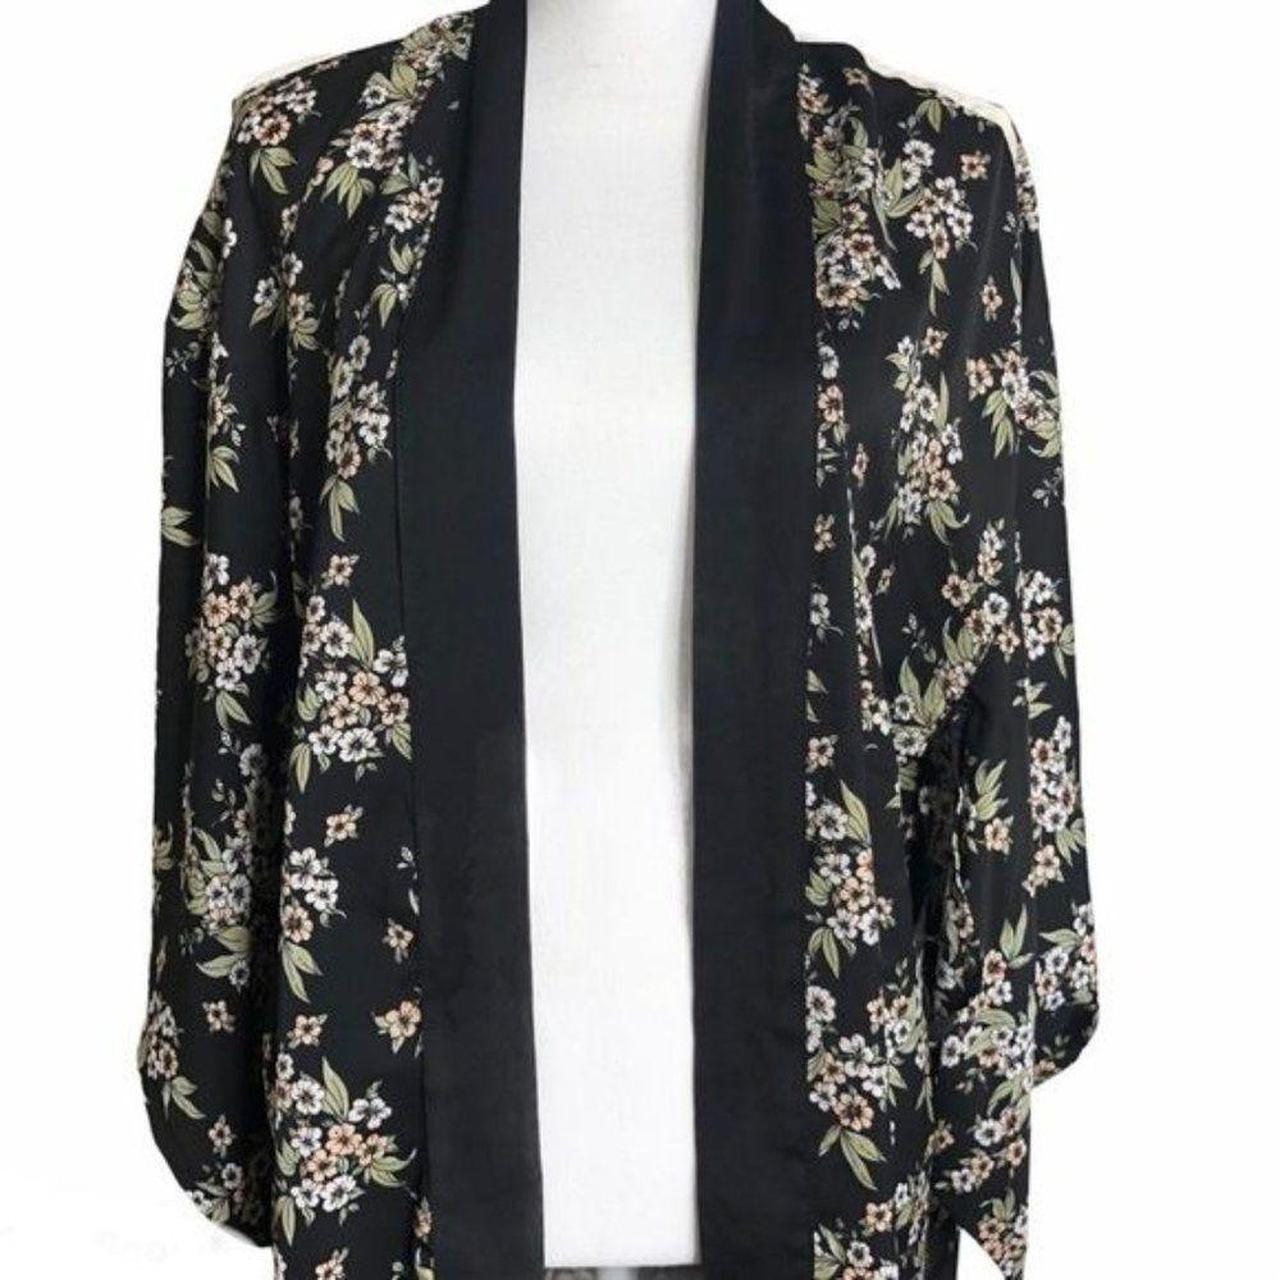 Product Image 2 - Forever 21 Floral Kimono Small

Pre